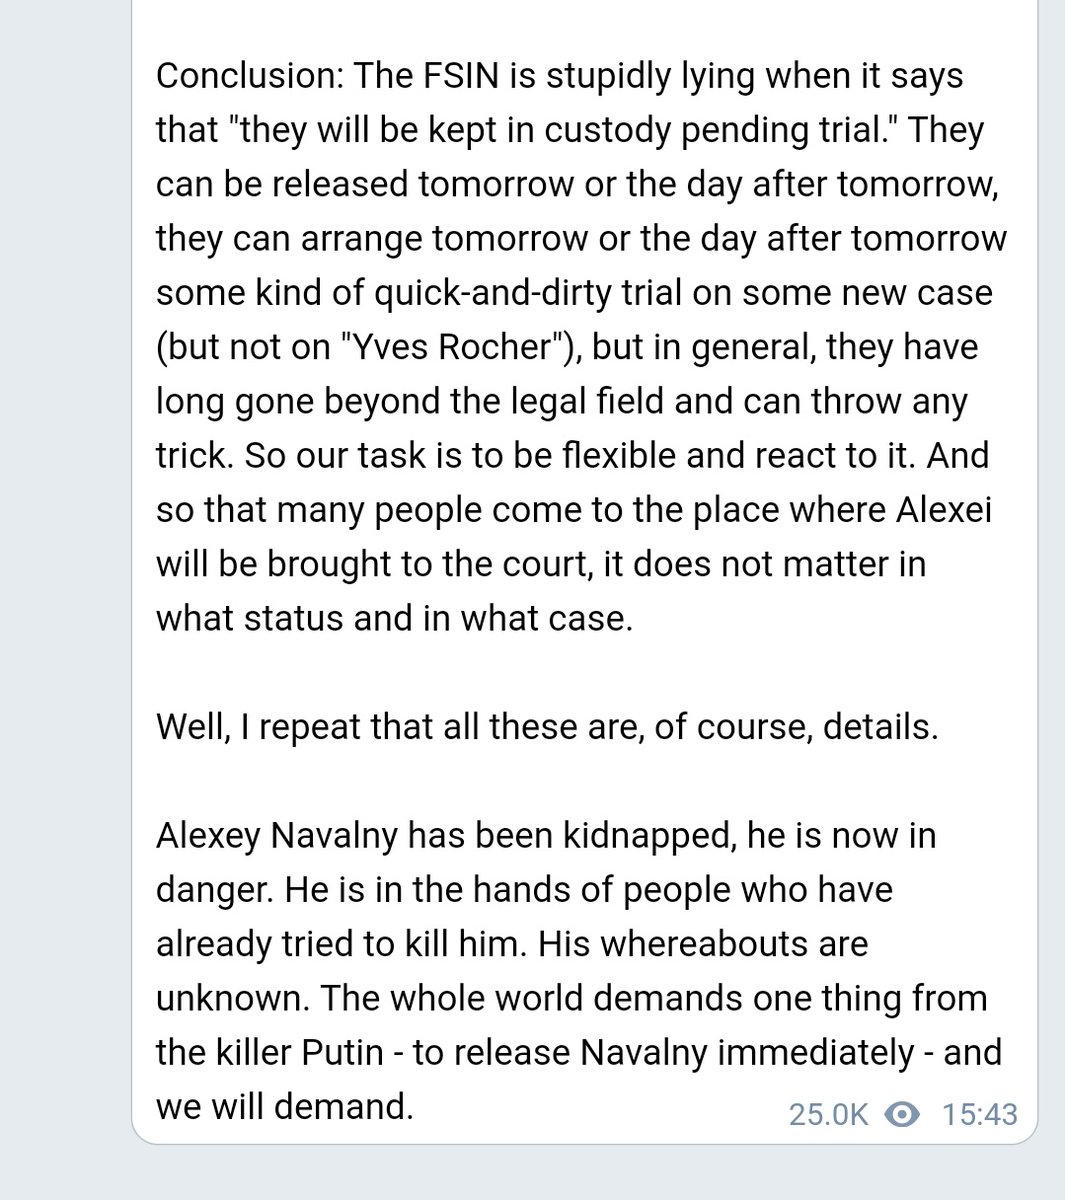 Important statement on Navalny. Putin and his rotten regime are a bunch of cowardly criminals